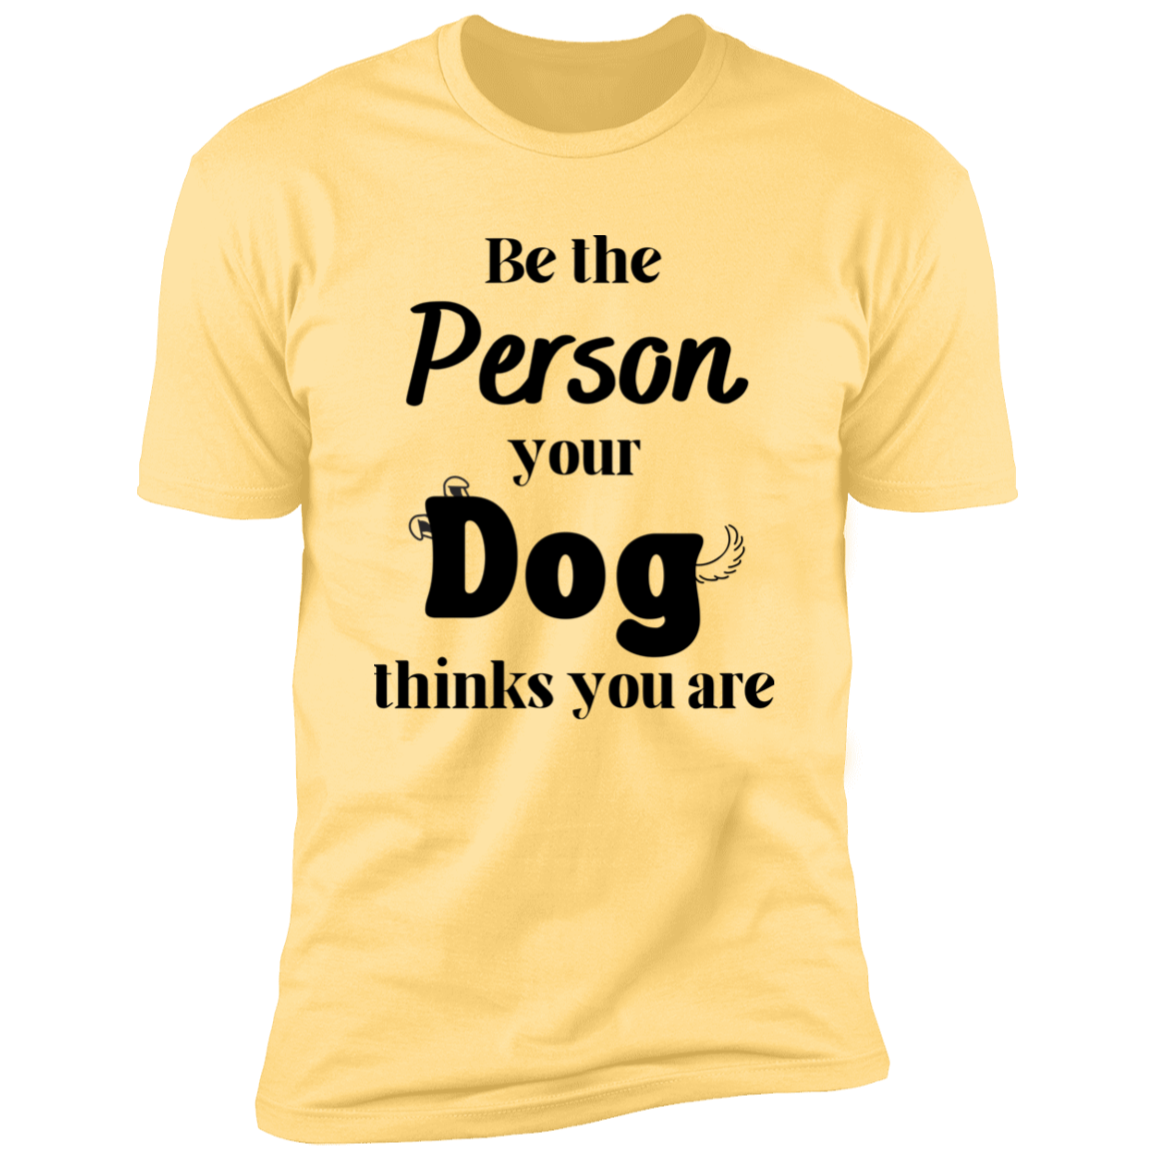 Be the Person Your Dog Thinks You Are T-shirt, Dog Shirt for humans, in banana cream